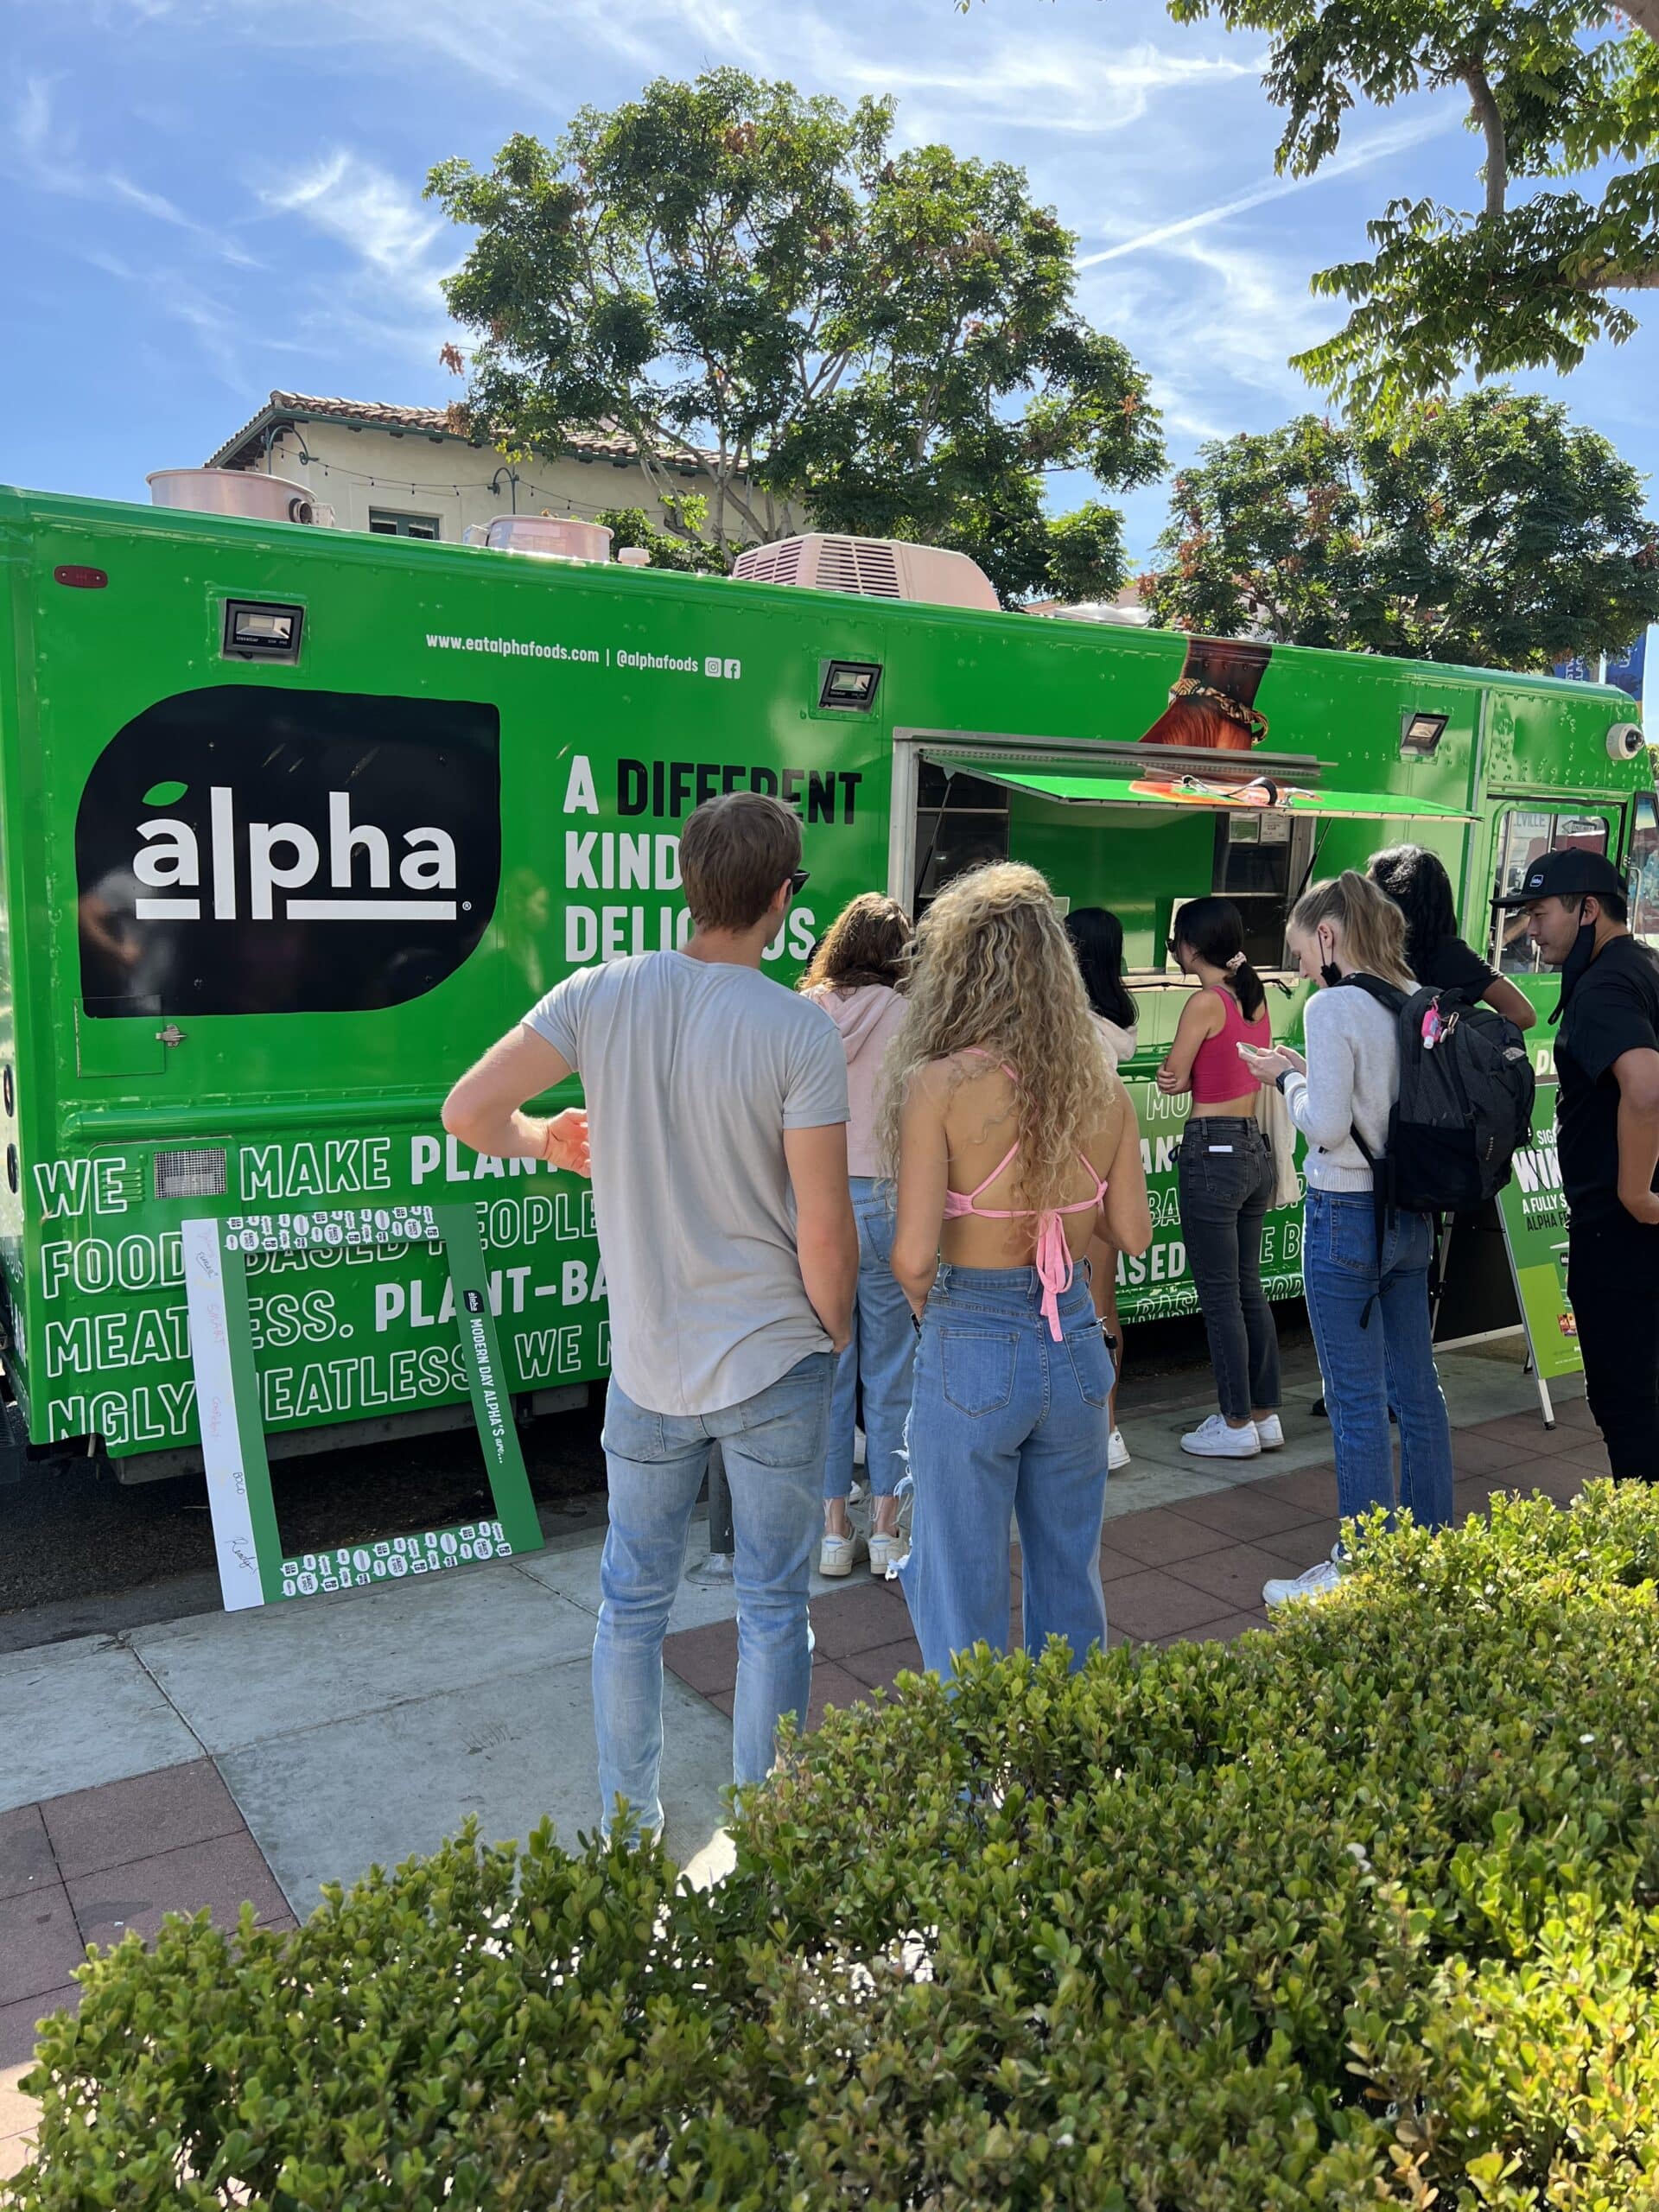 Students in front of Alpha Foods branded food truck